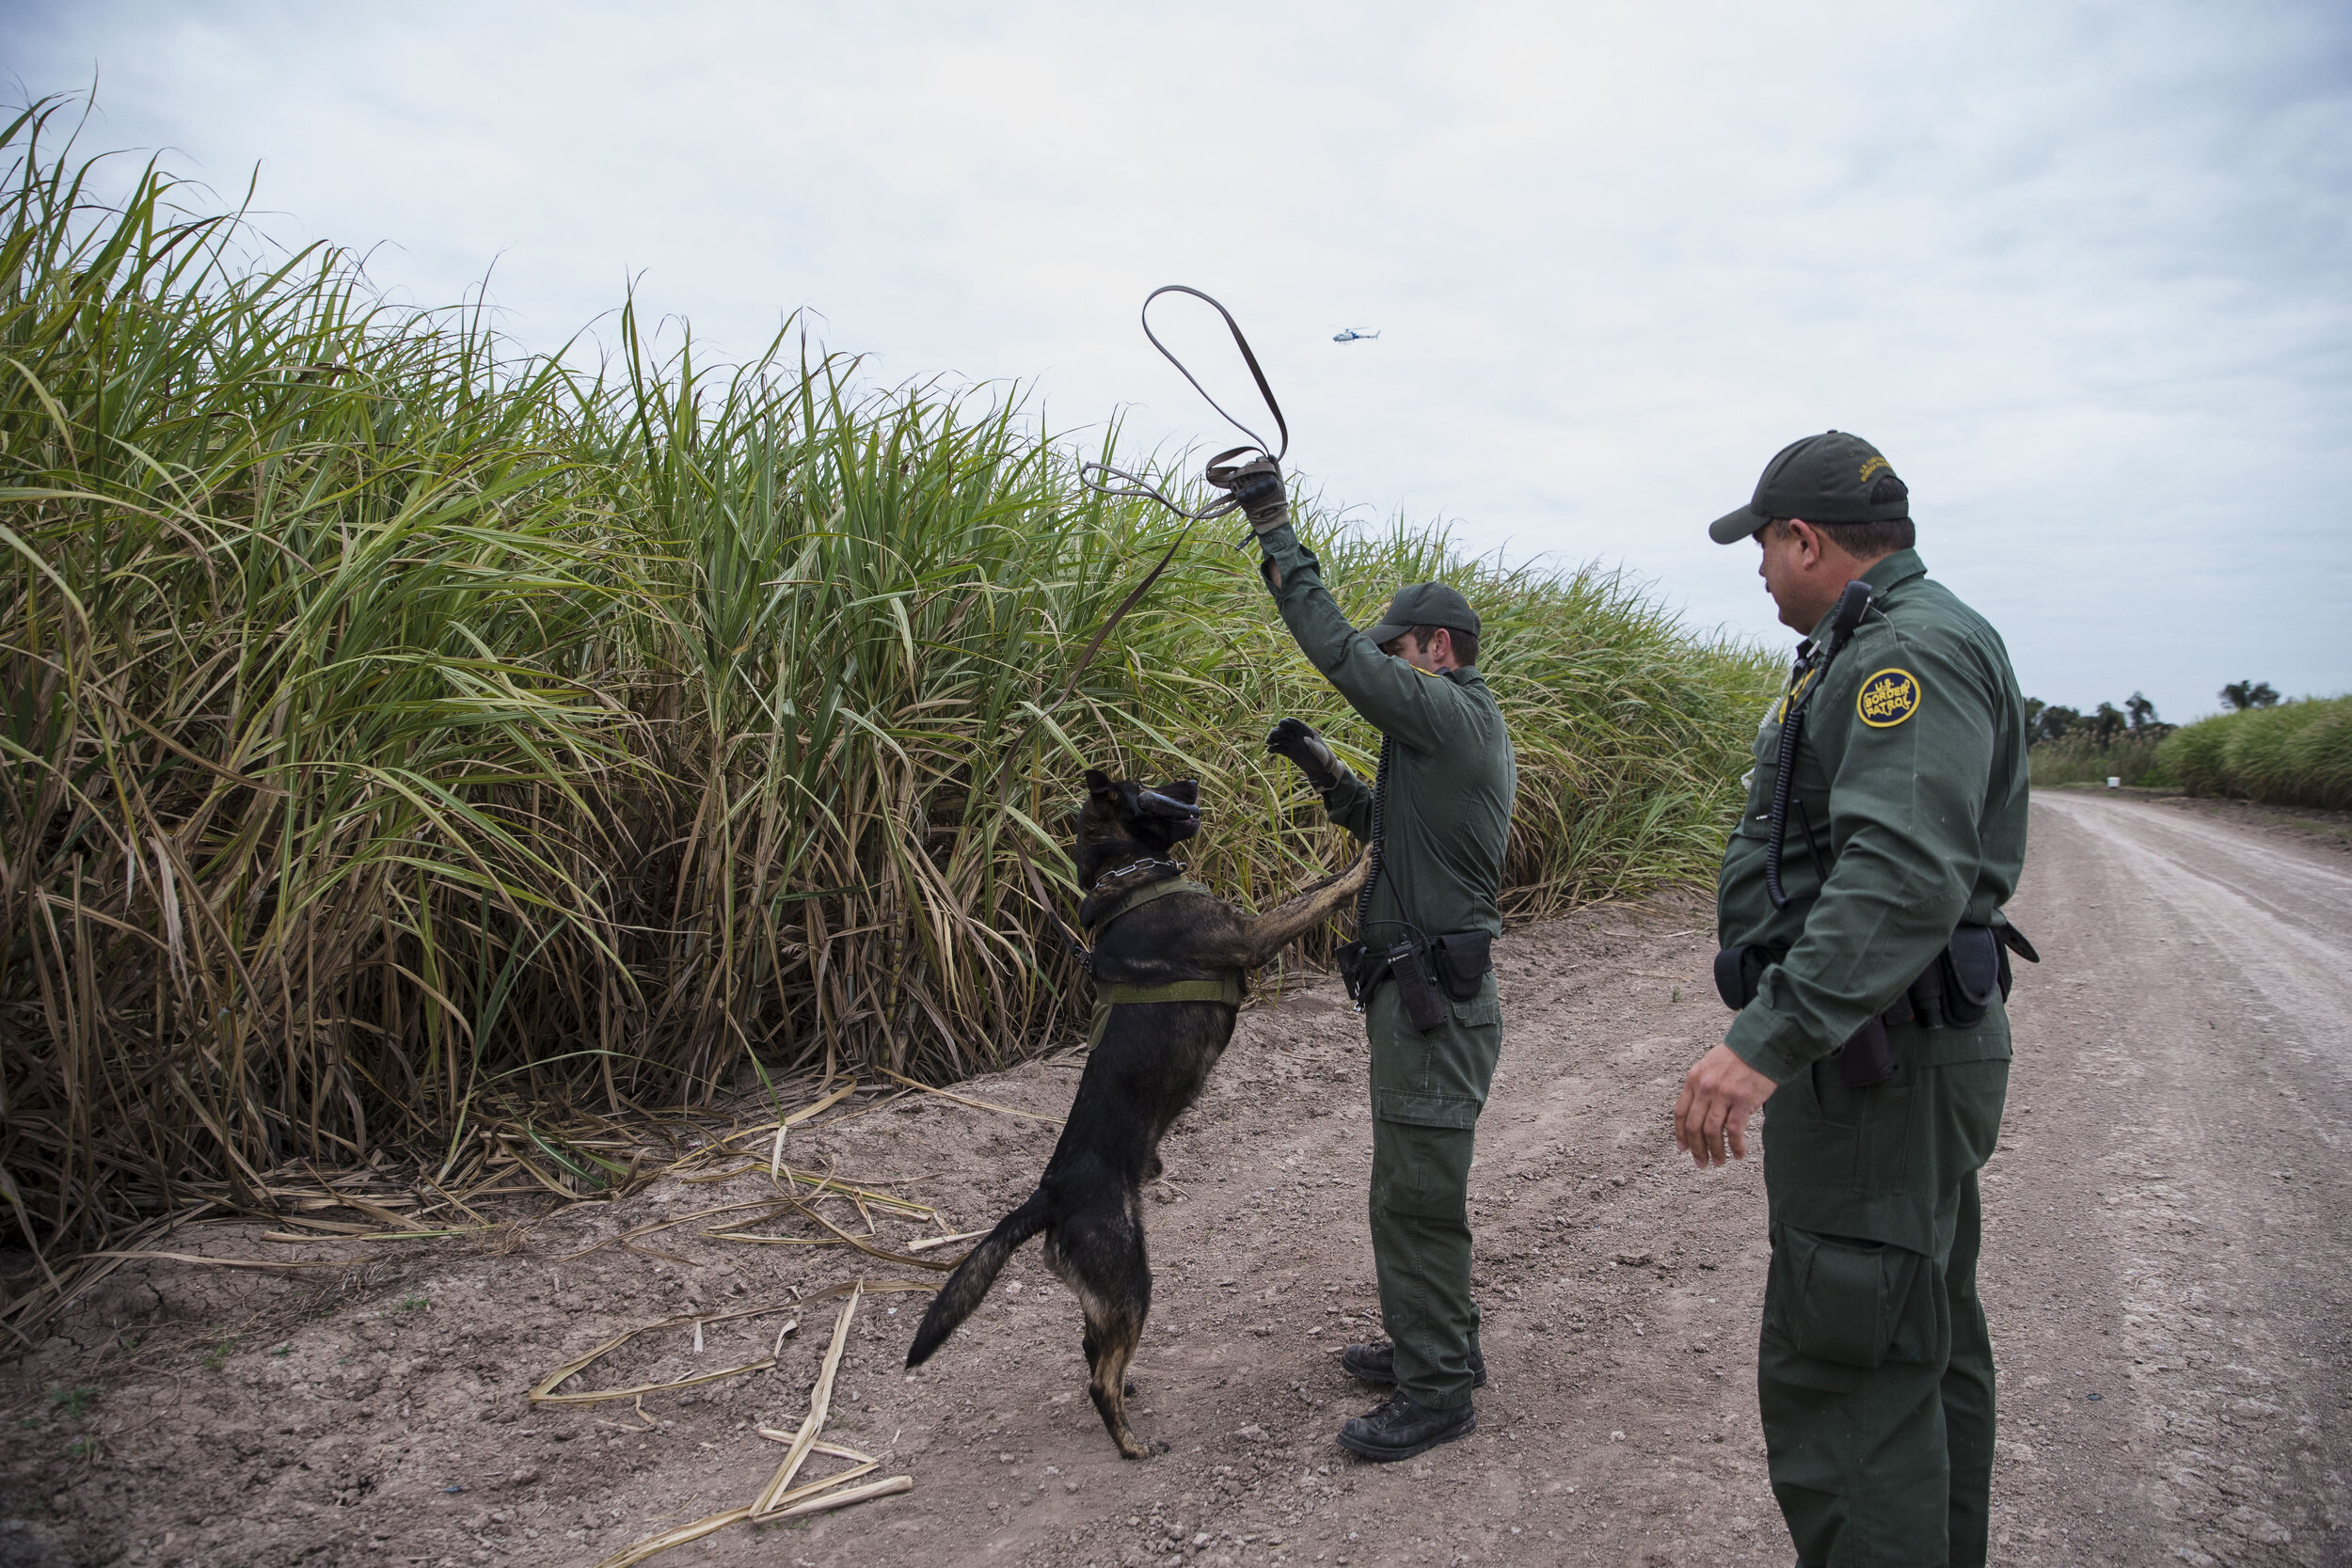  Border Patrol Agent Tait Seelhorst rewards his K-9 after apprehending a group of immigrants crossing the border from Mexico into the United States on Wednesday, Dec. 5, 2018, near McAllen, TX. 